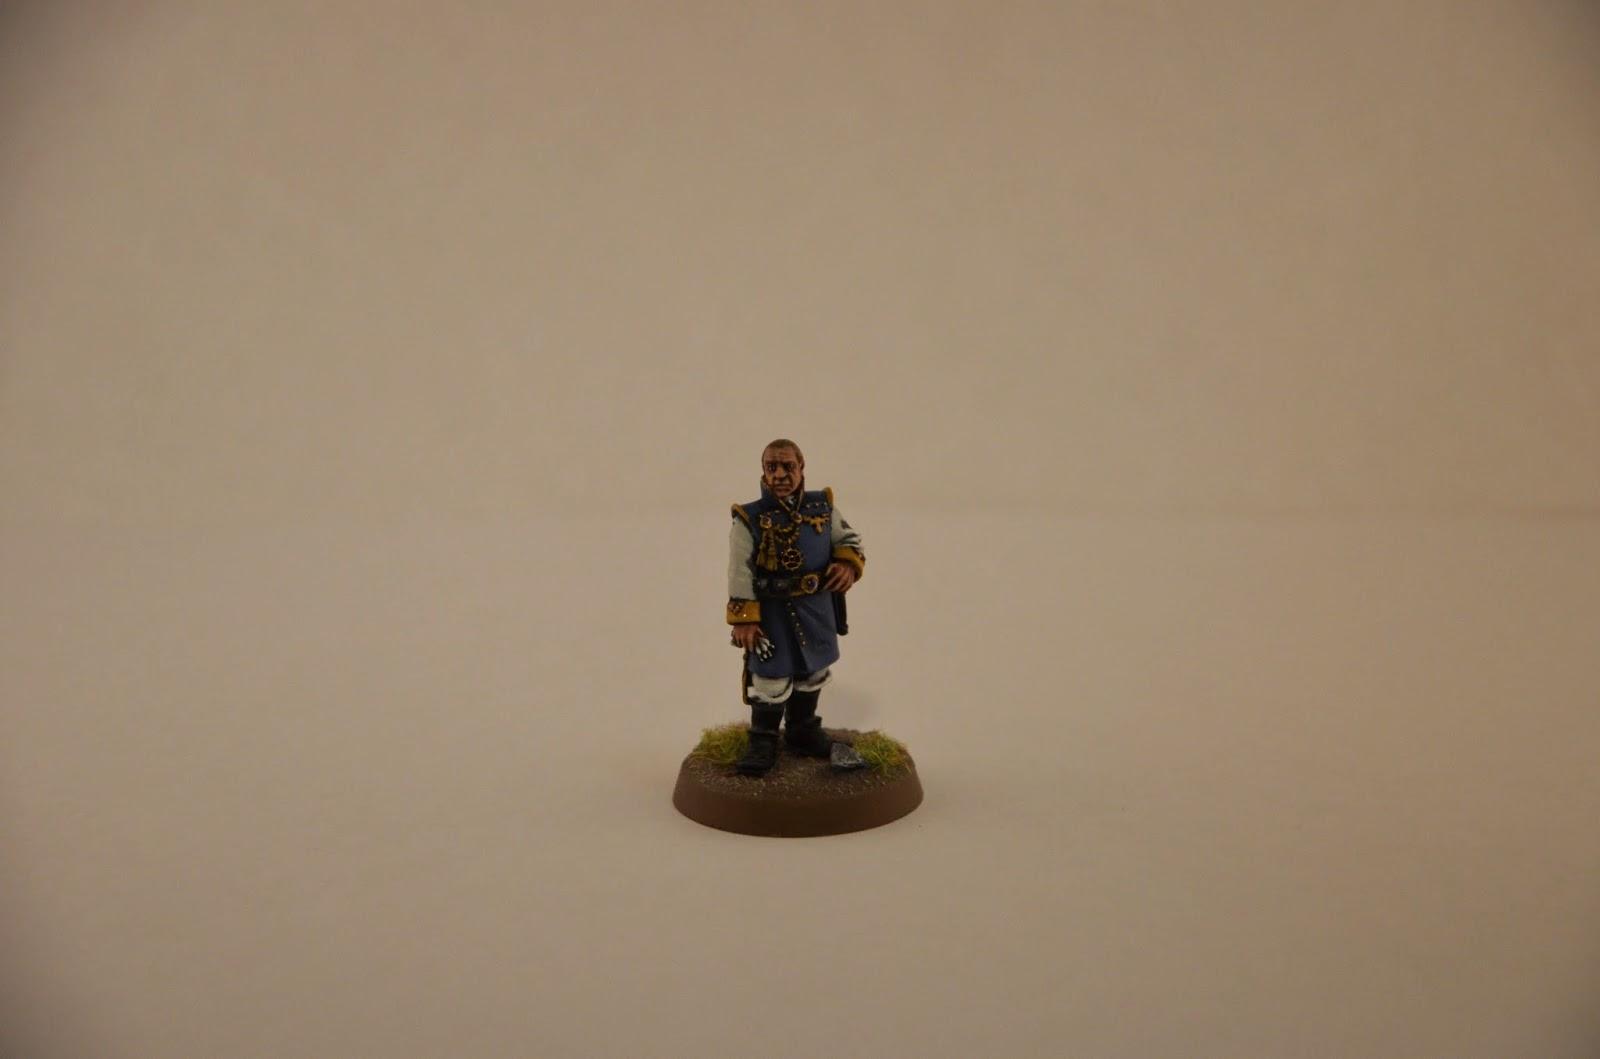 Cadians, How To Paint, Imperial Guard, Officer Of The Fleet, Painting, Warhammer 40,000, Warhammer Fantasy